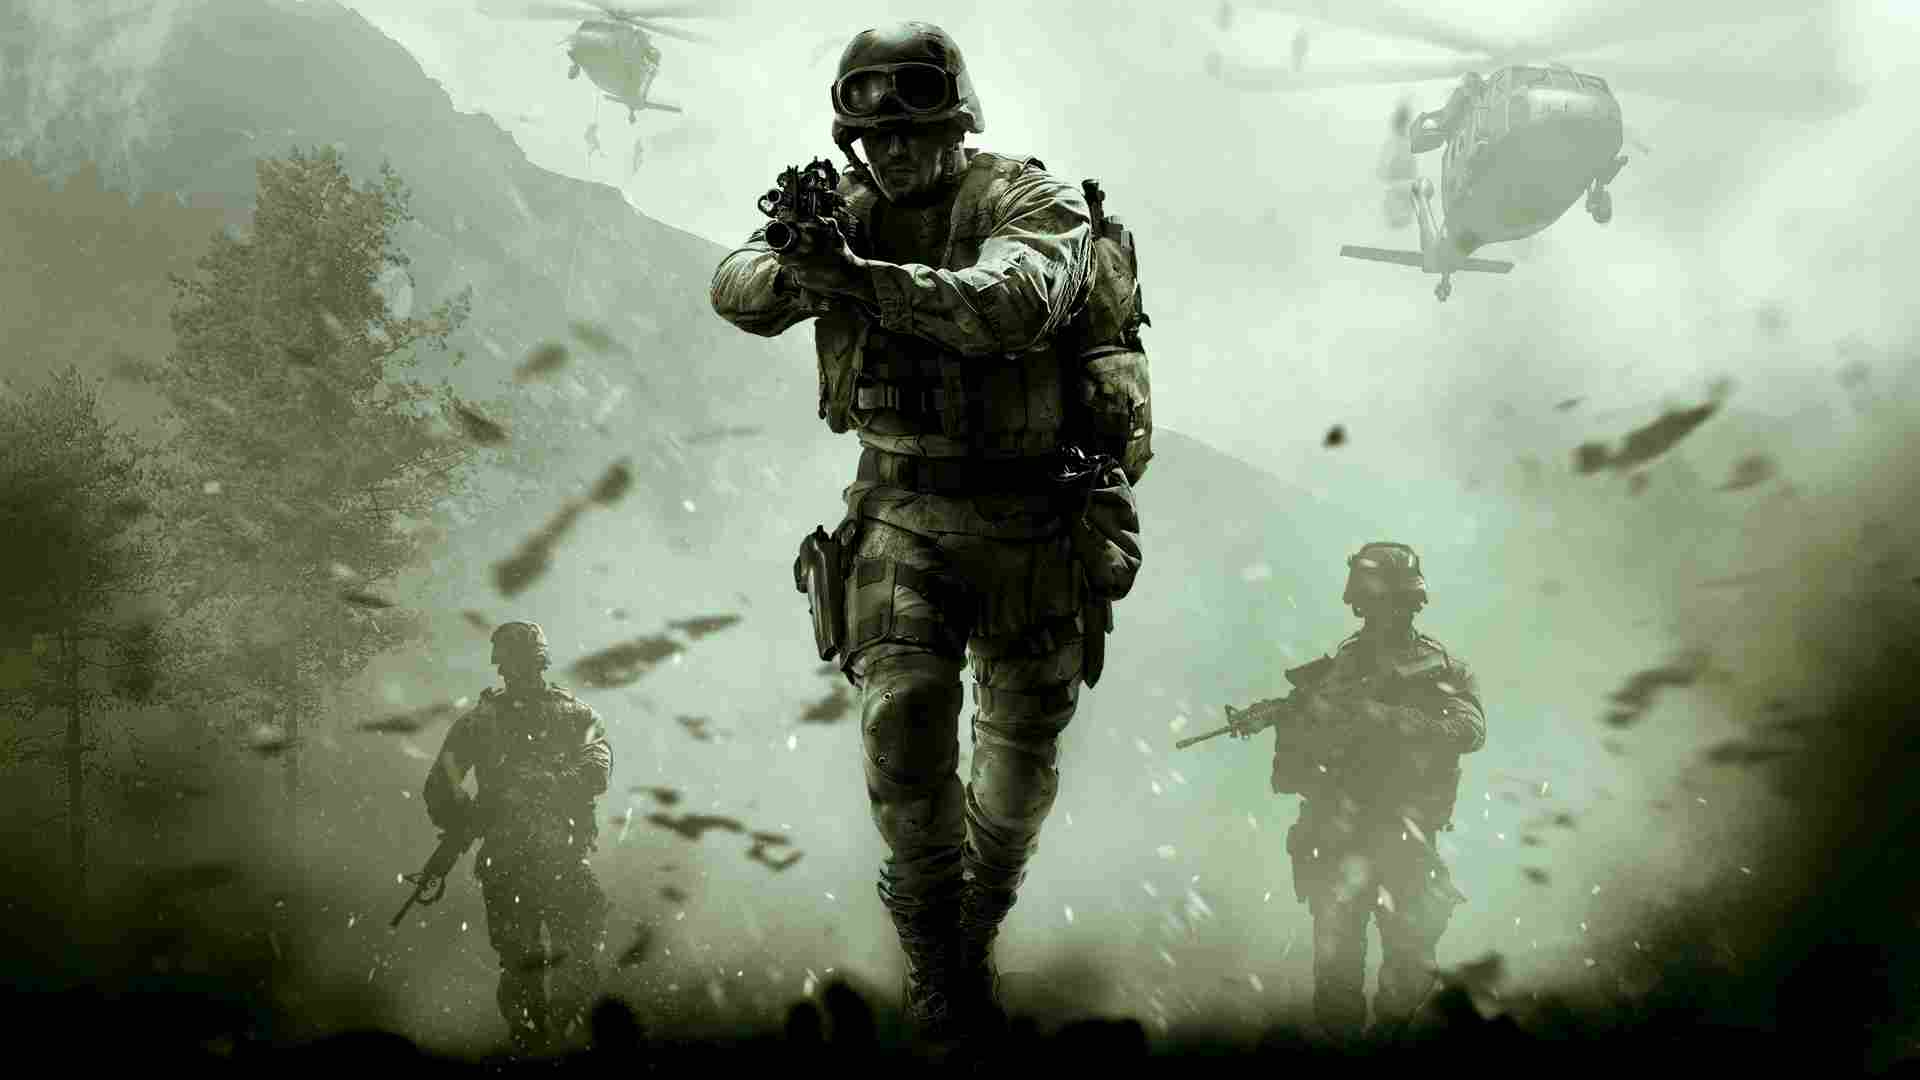 Call of Duty Games Coming to Xbox Game Pass: Modern Warfare 3 and Black Ops